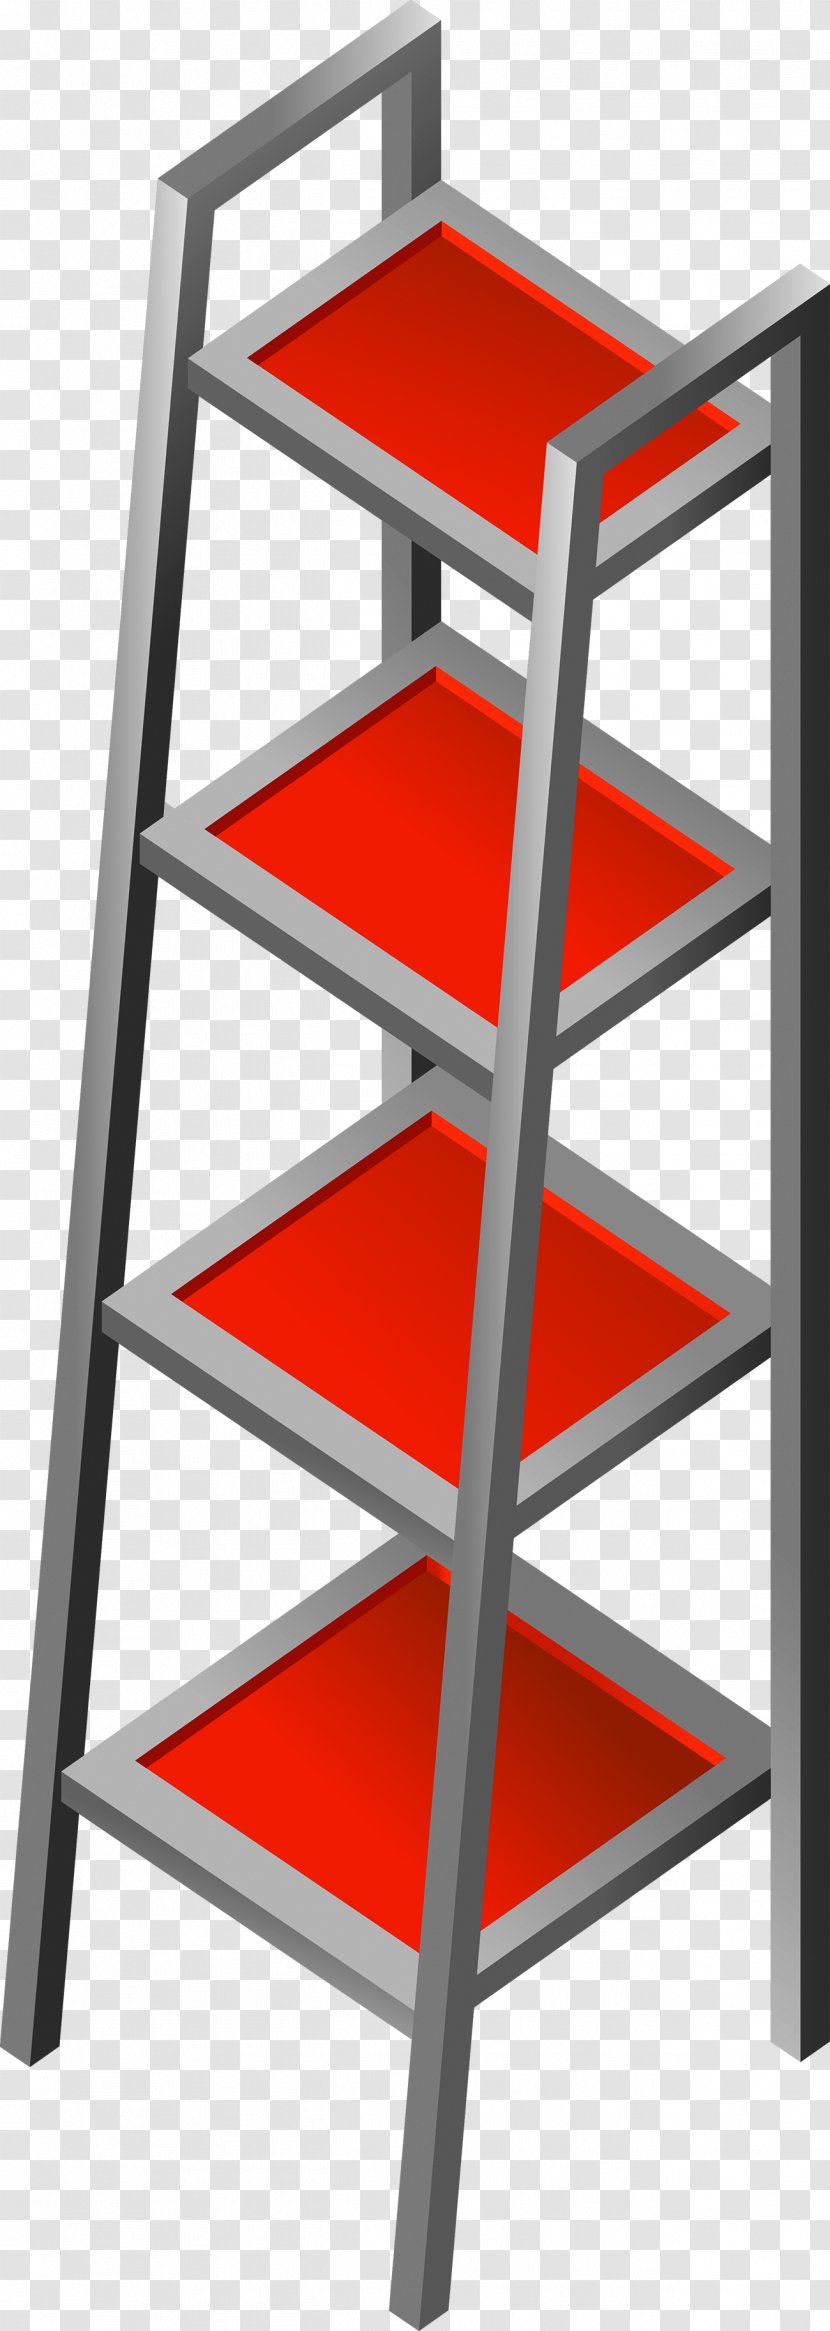 Stairs Ladder - Shelf Transparent PNG